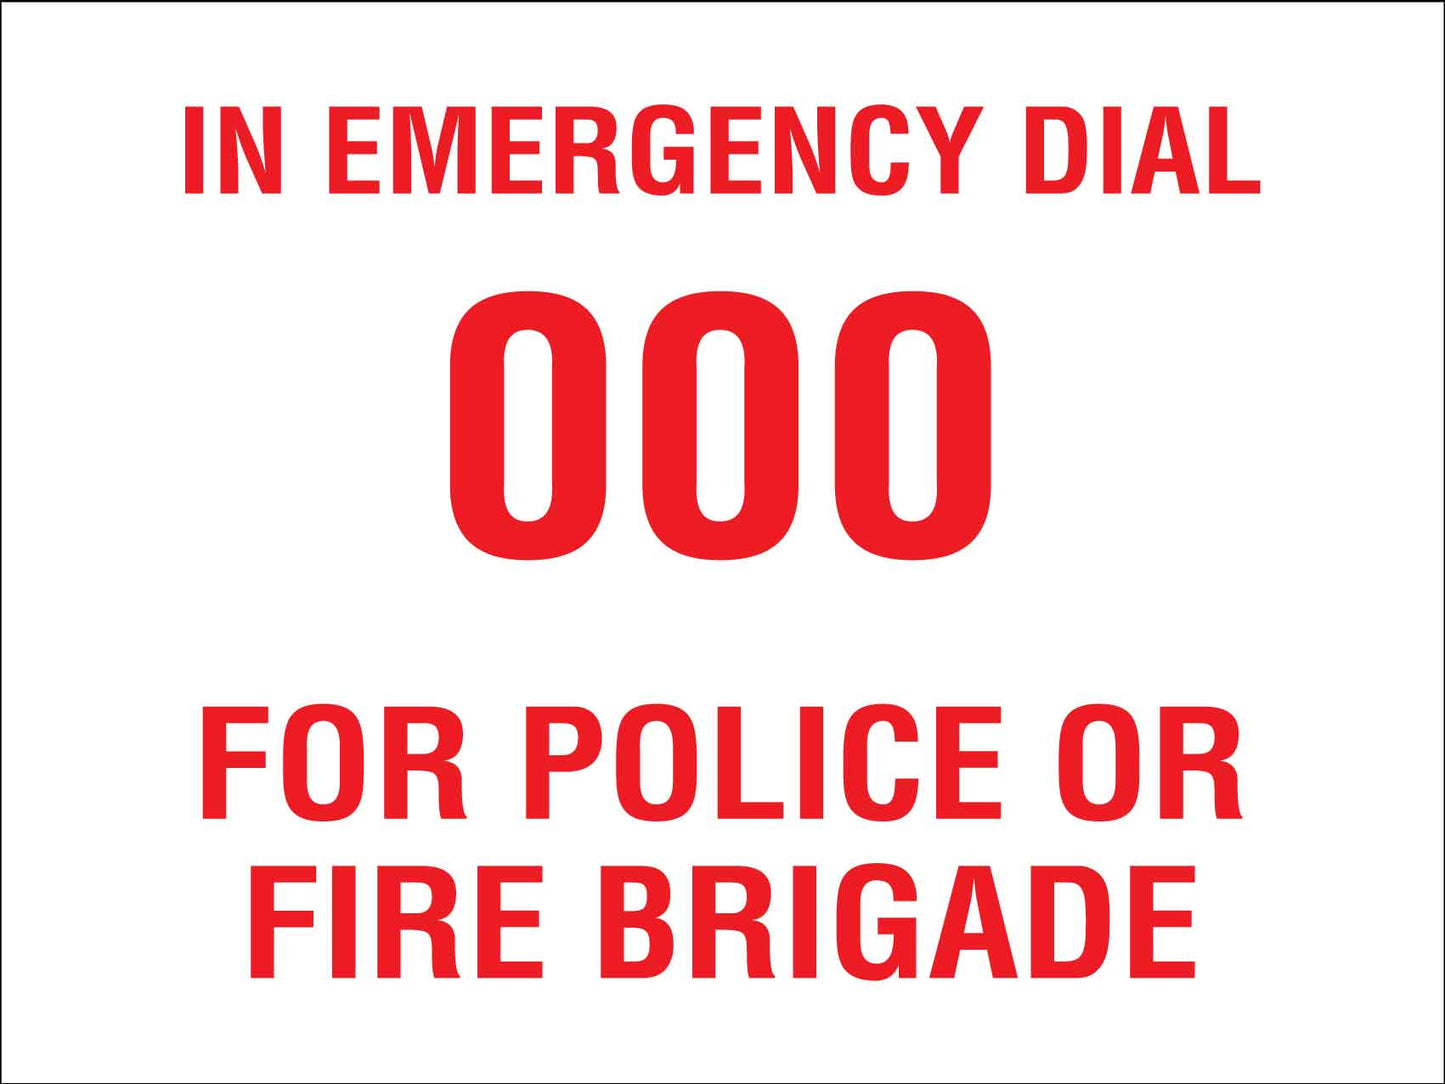 In Emergency Dial 000 For Police Or Brigade Sign